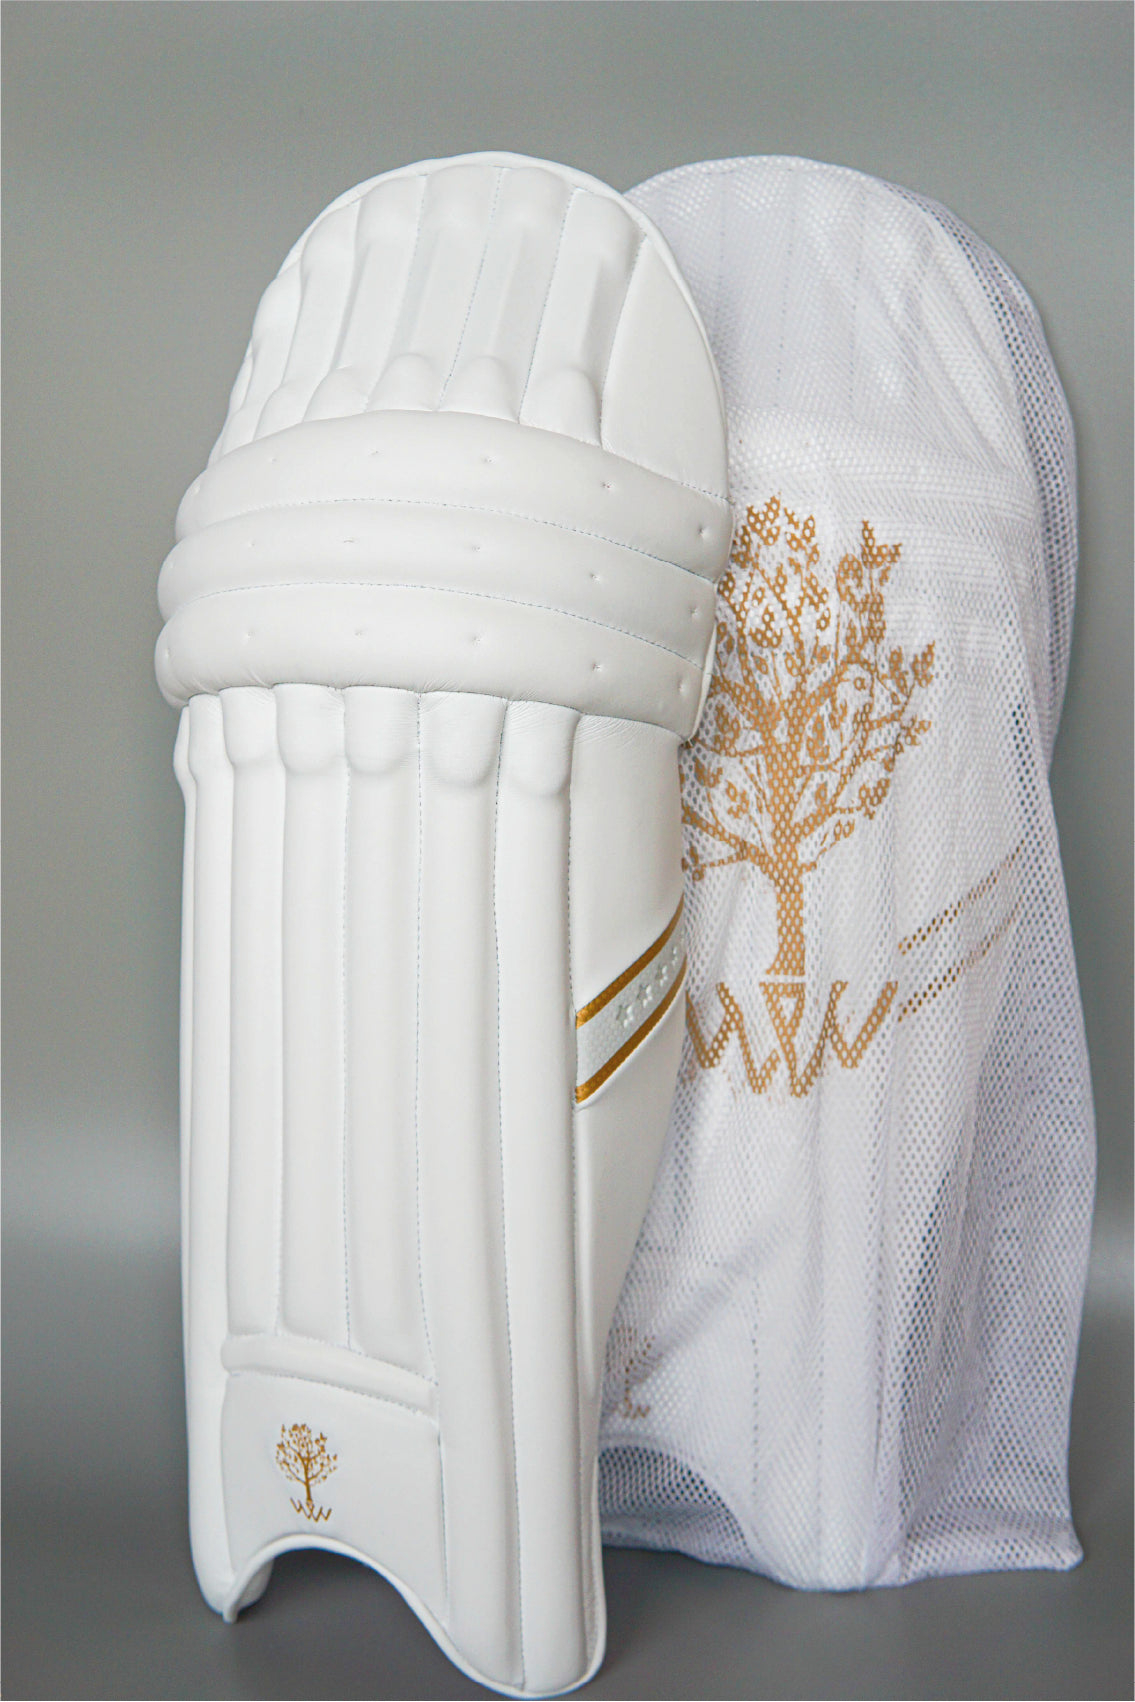 A limited edition net carry bag to house your Willow Twin Cricket Batting Pads